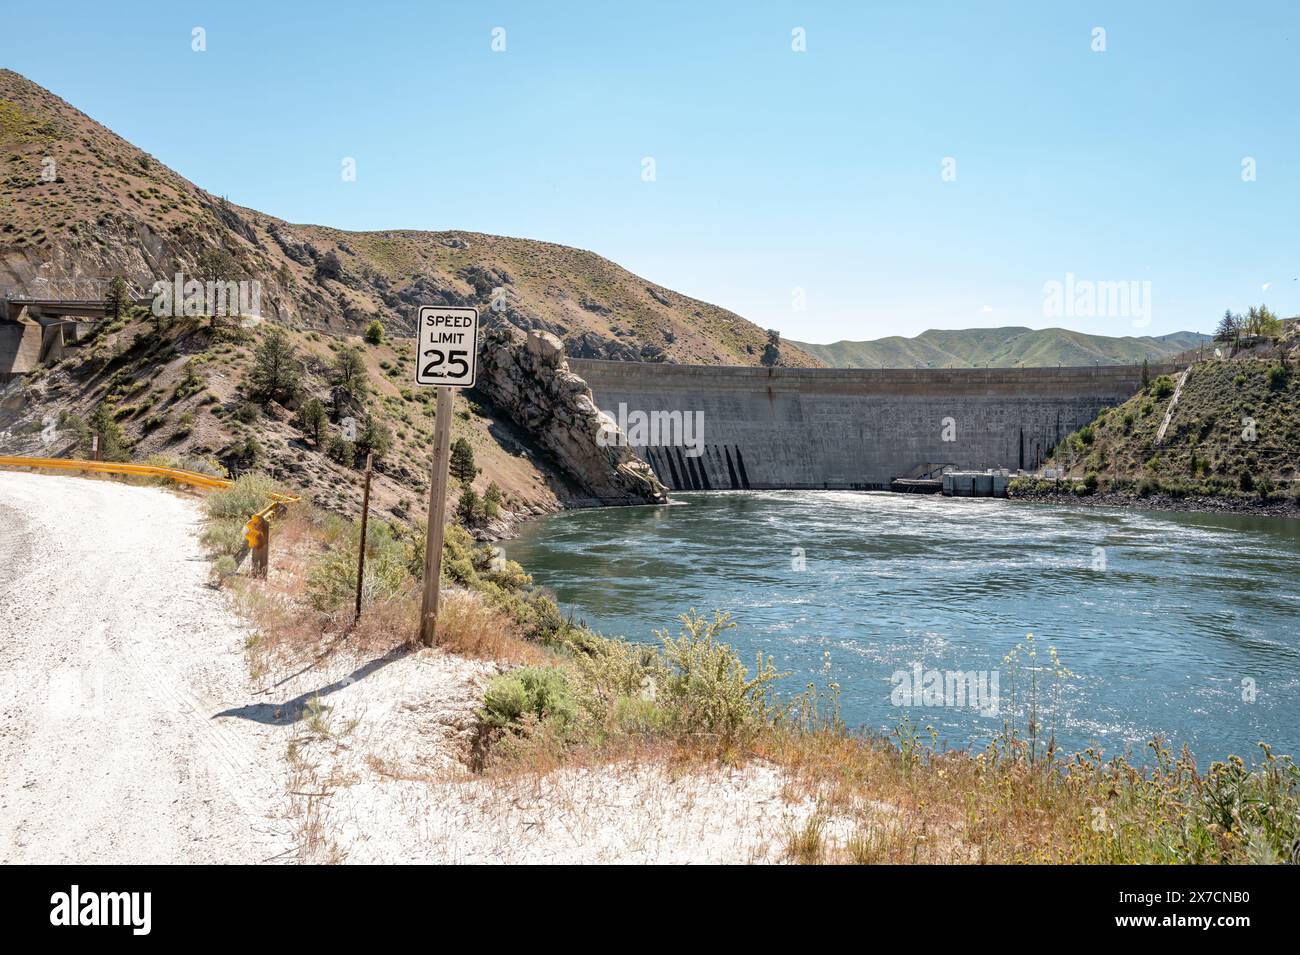 Speed limit sign at a hydroelectric Dam on the Boise River Stock Photo